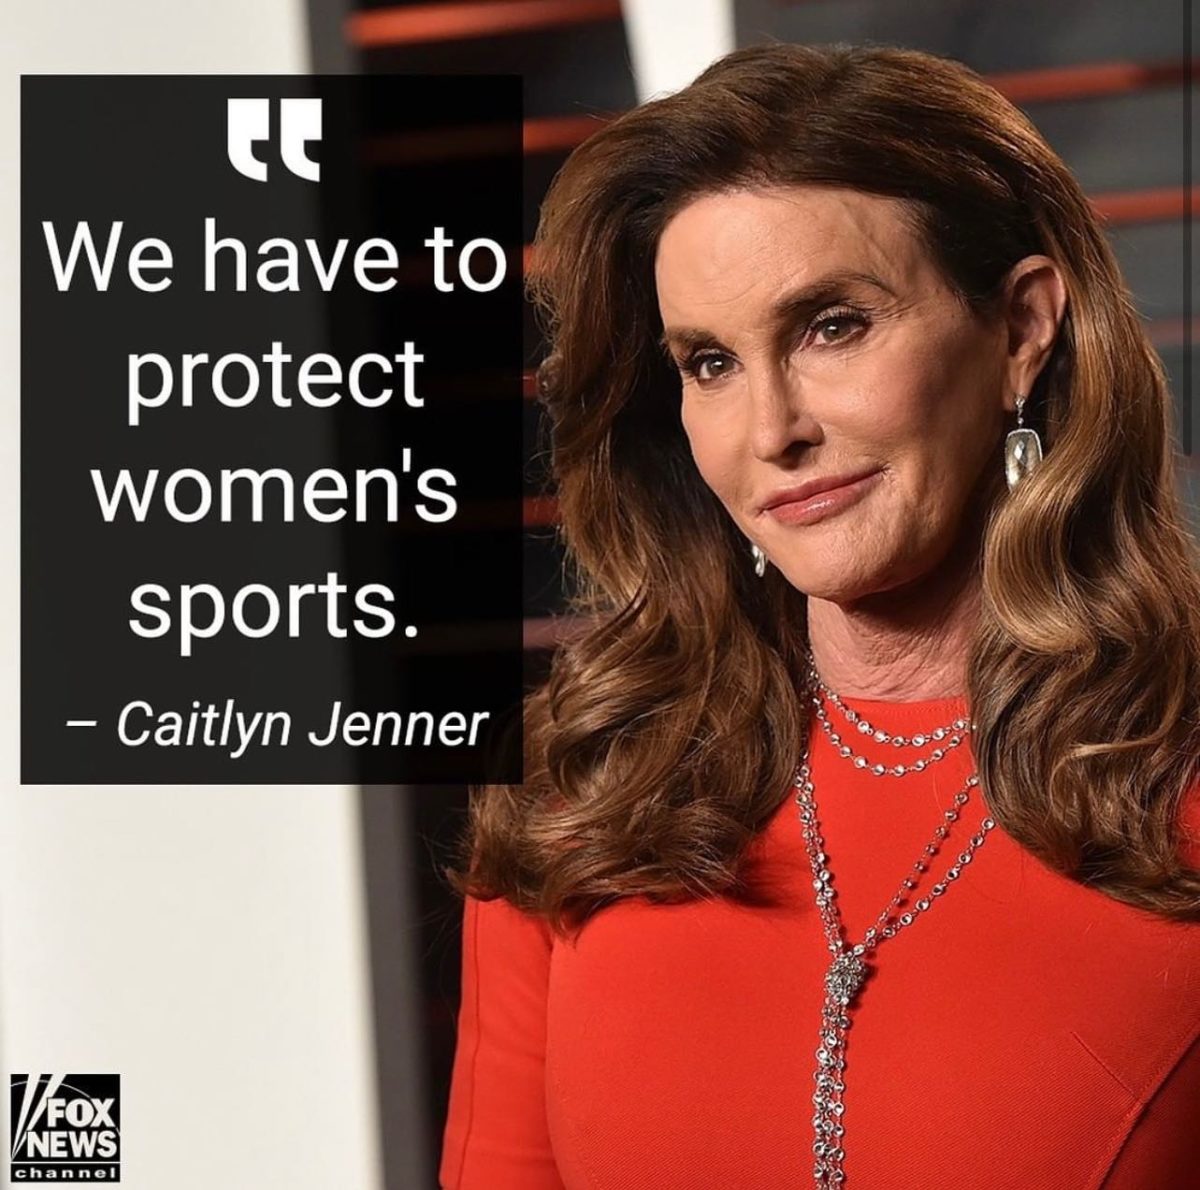 caitlyn jenner signs on to fox news as a contributor